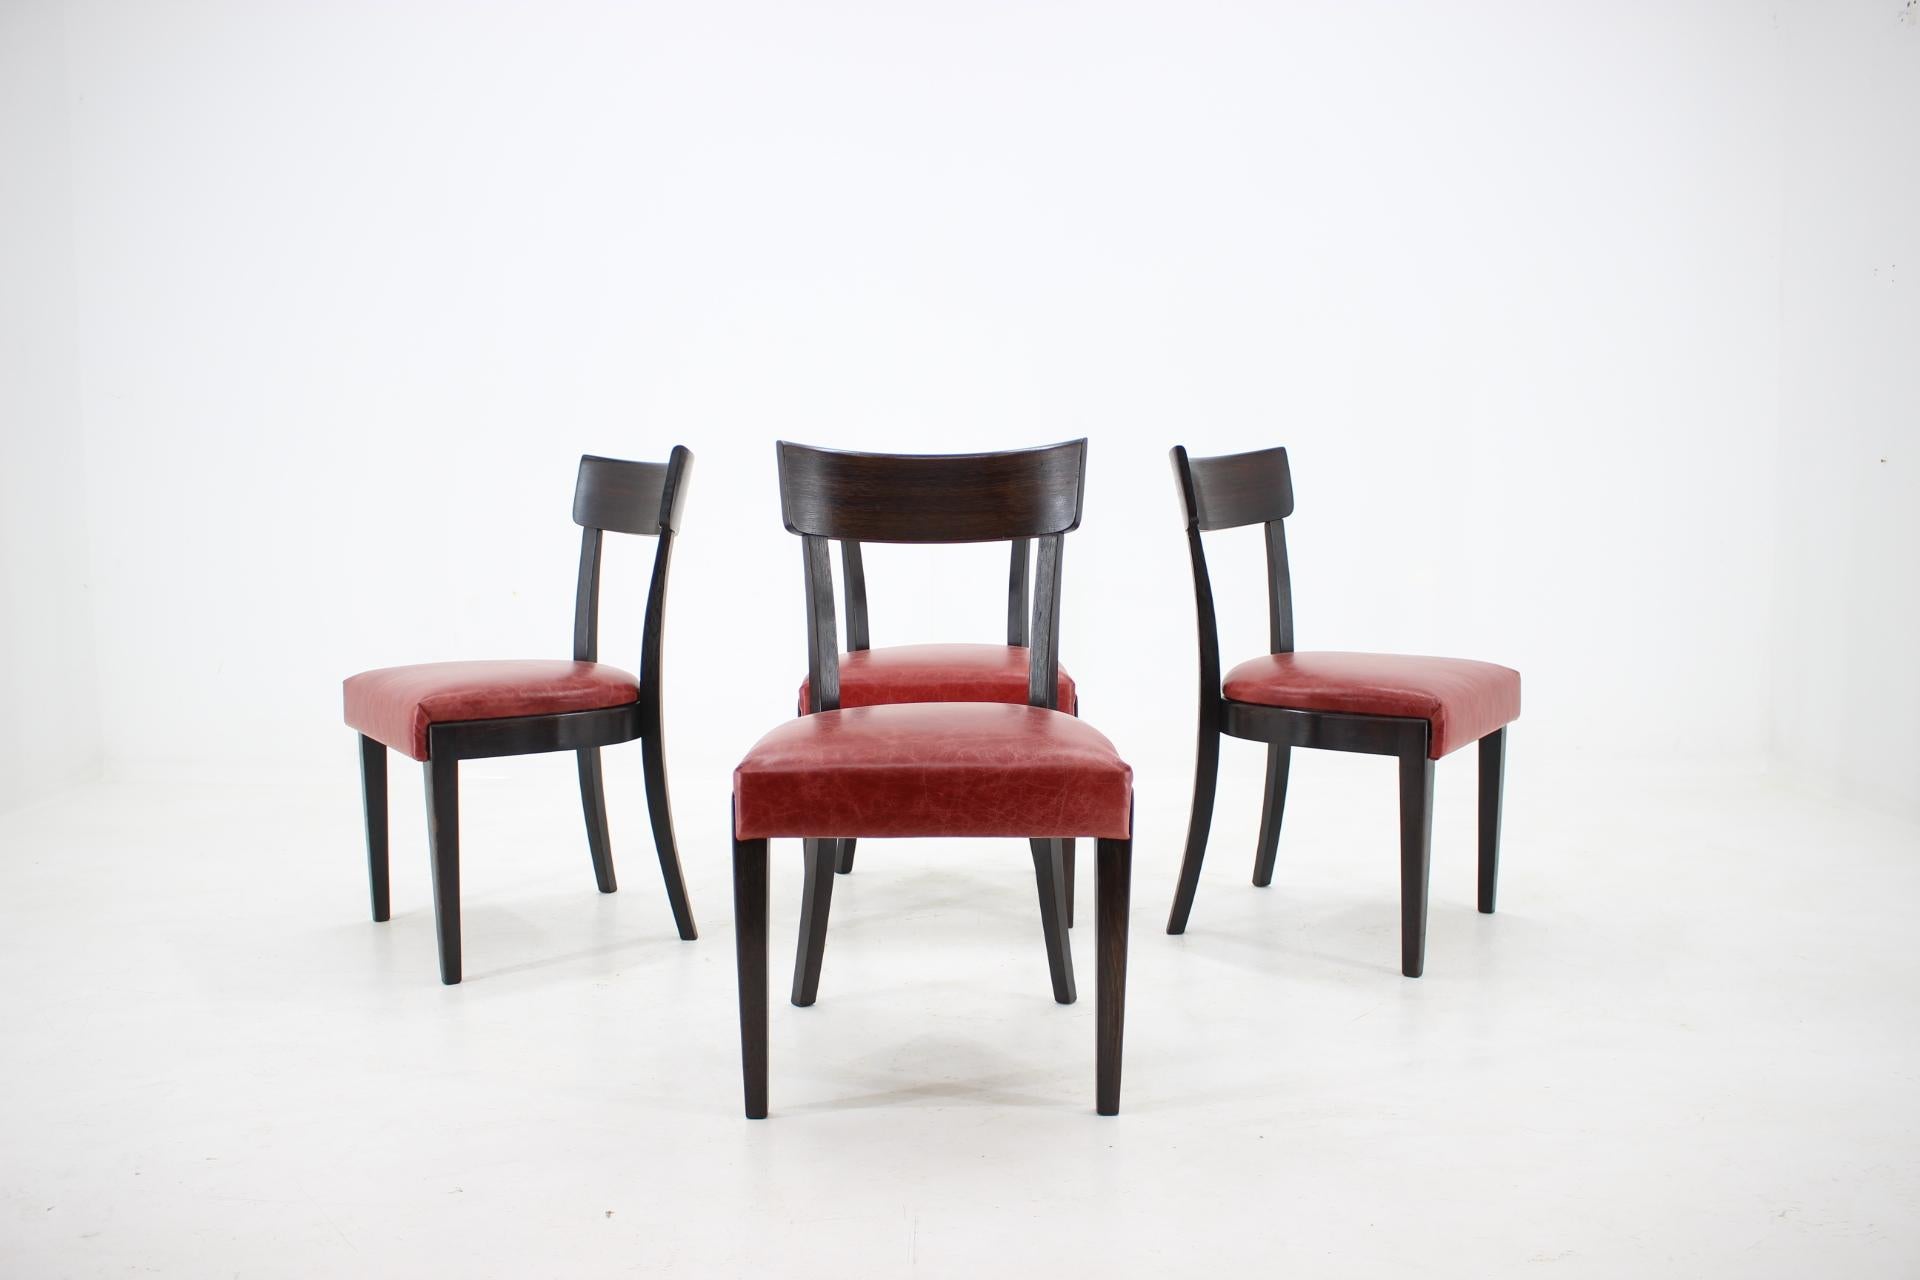 - Newly upholstered in quality red leather
- Wooden parts have been repolished.